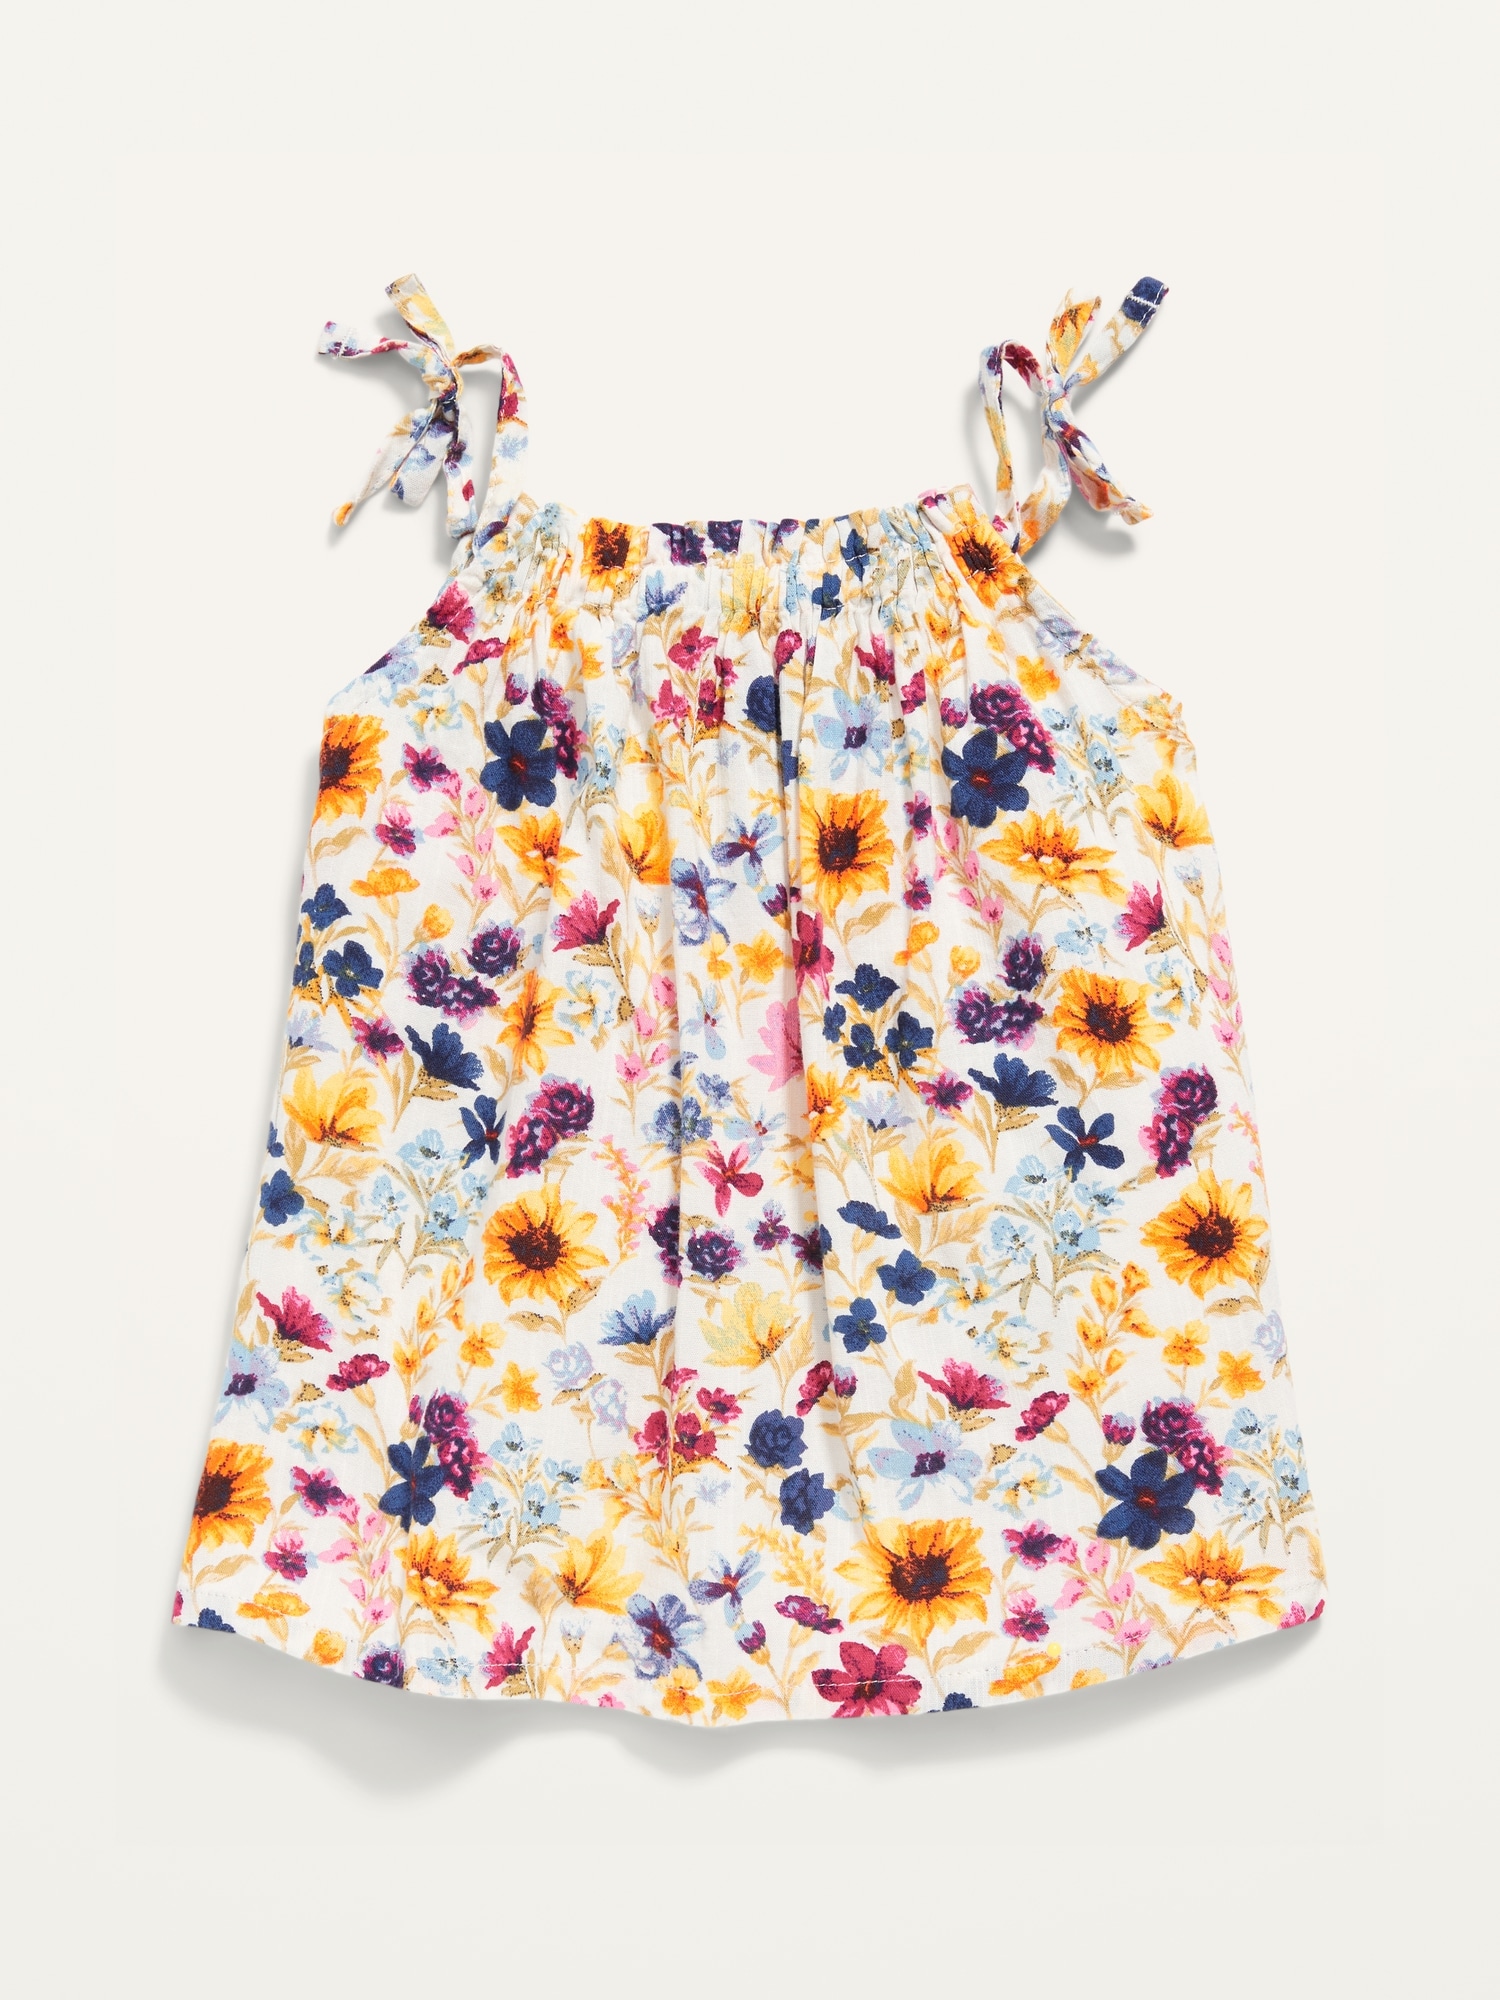 Sleeveless Floral Swing Top for Toddler Girls | Old Navy